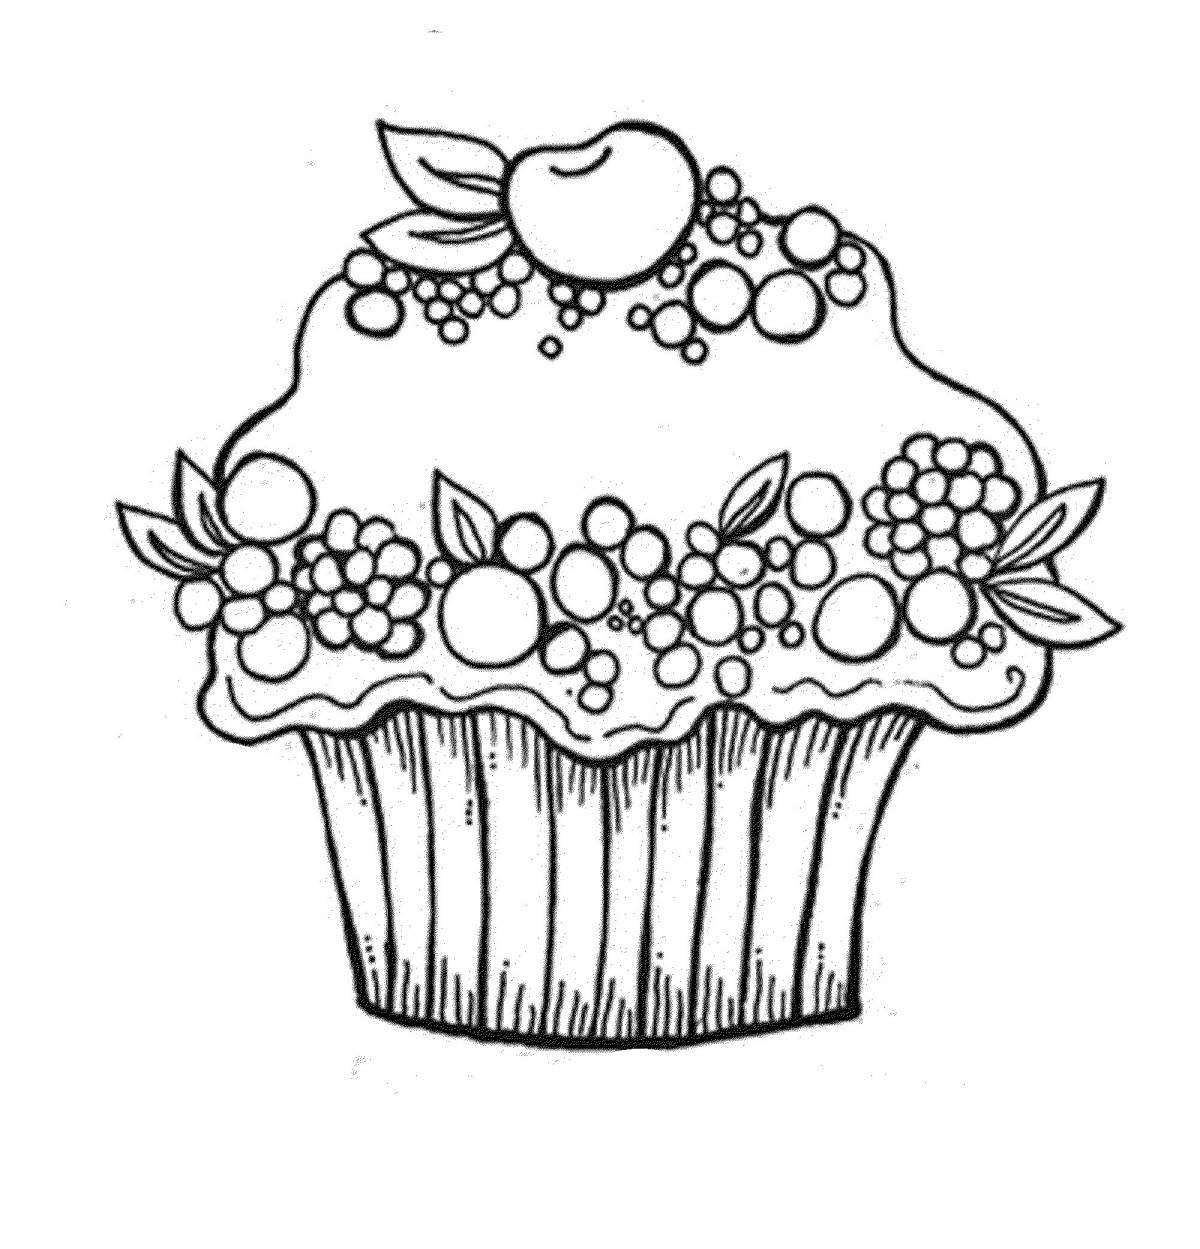 Cute cupcake coloring pages for kids